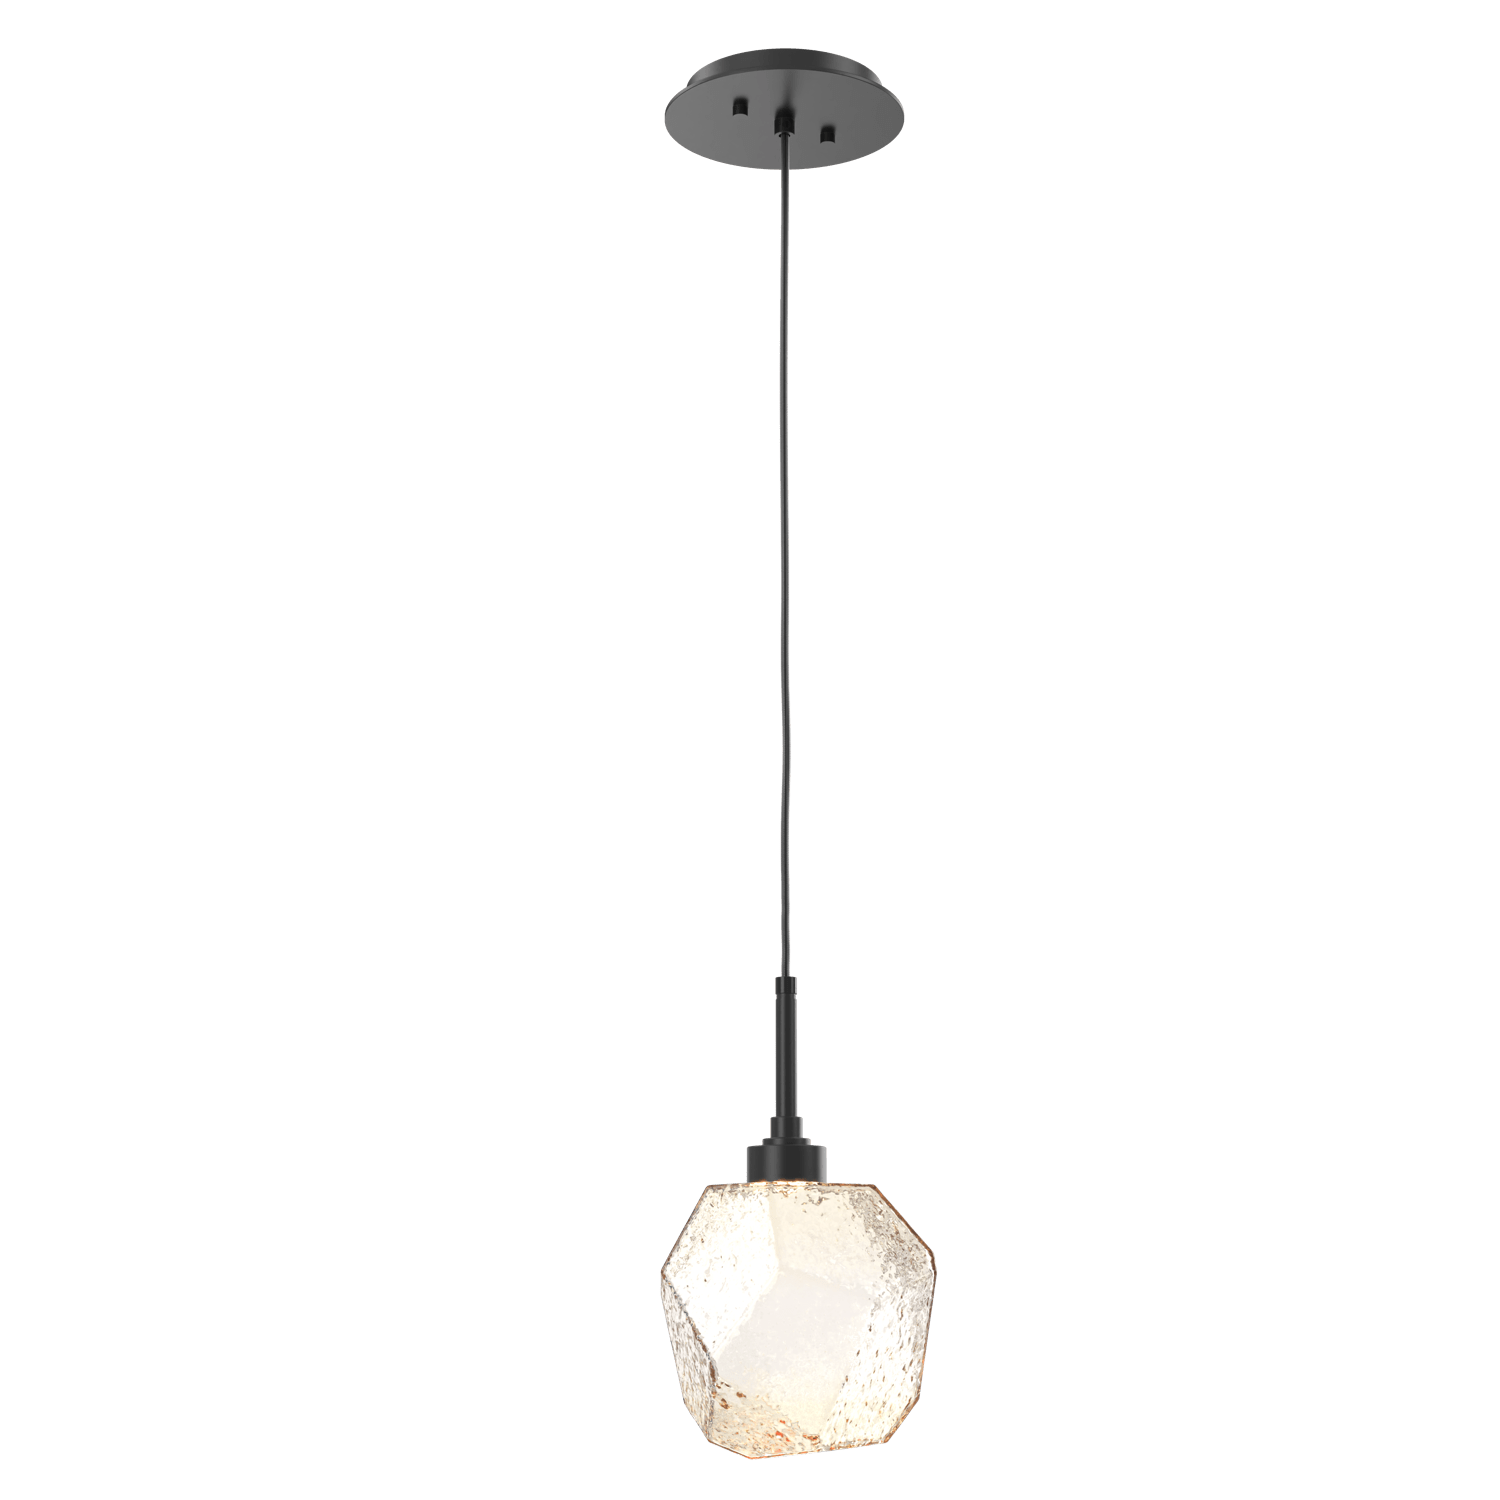 LAB0039-01-MB-A-Hammerton-Studio-Gem-pendant-light-with-matte-black-finish-and-amber-blown-glass-shades-and-LED-lamping